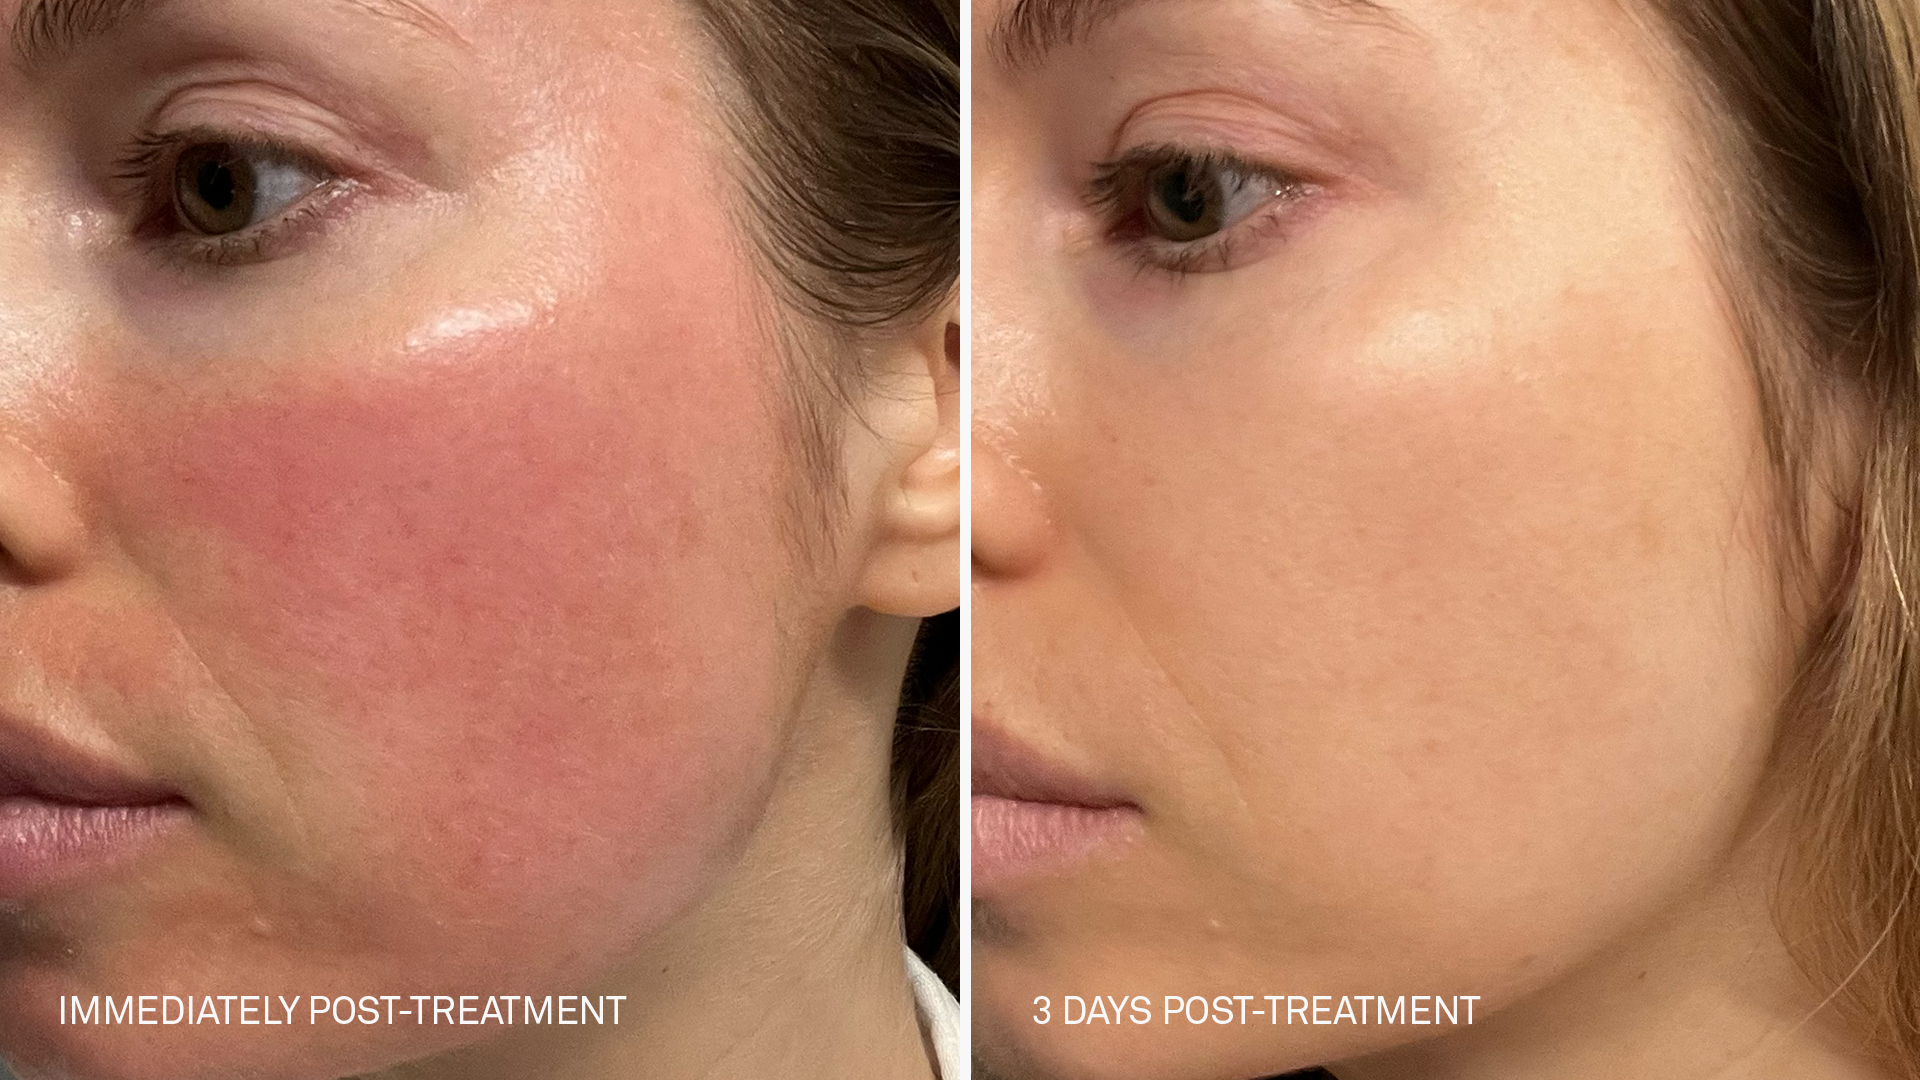 before and after images of a woman's face immediately after clear + brilliant treatment with redness, and 3 days post-treatment with the RescueMD serum